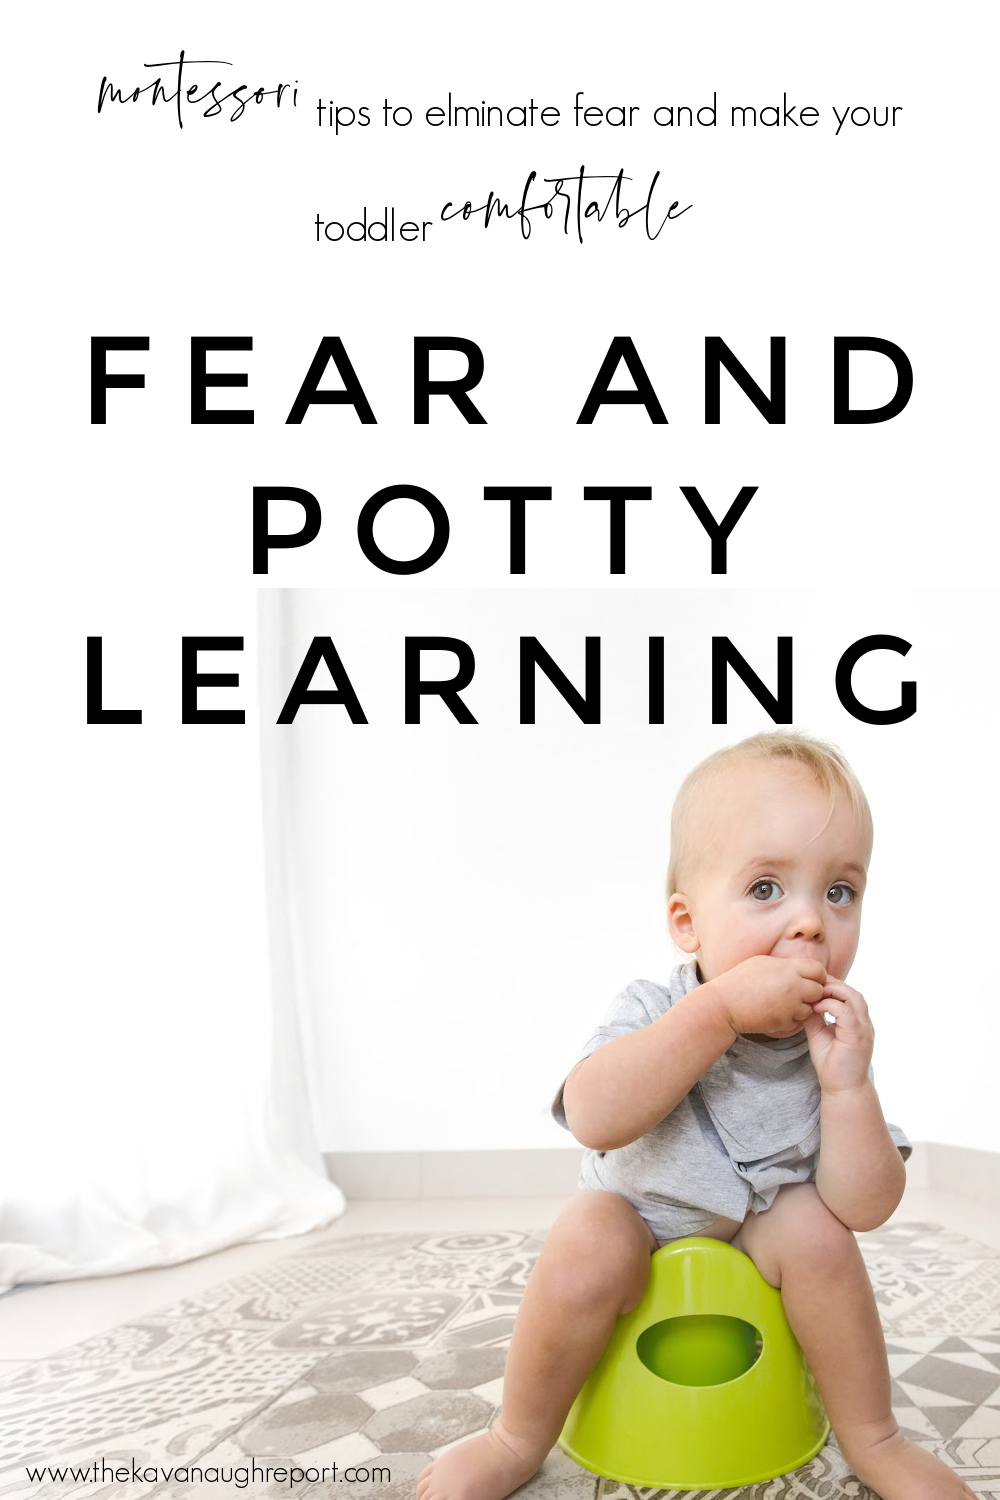 Montessori potty learning can be challenging for toddlers, here are some tips to help them overcome their fear and get comfortable with the potty.